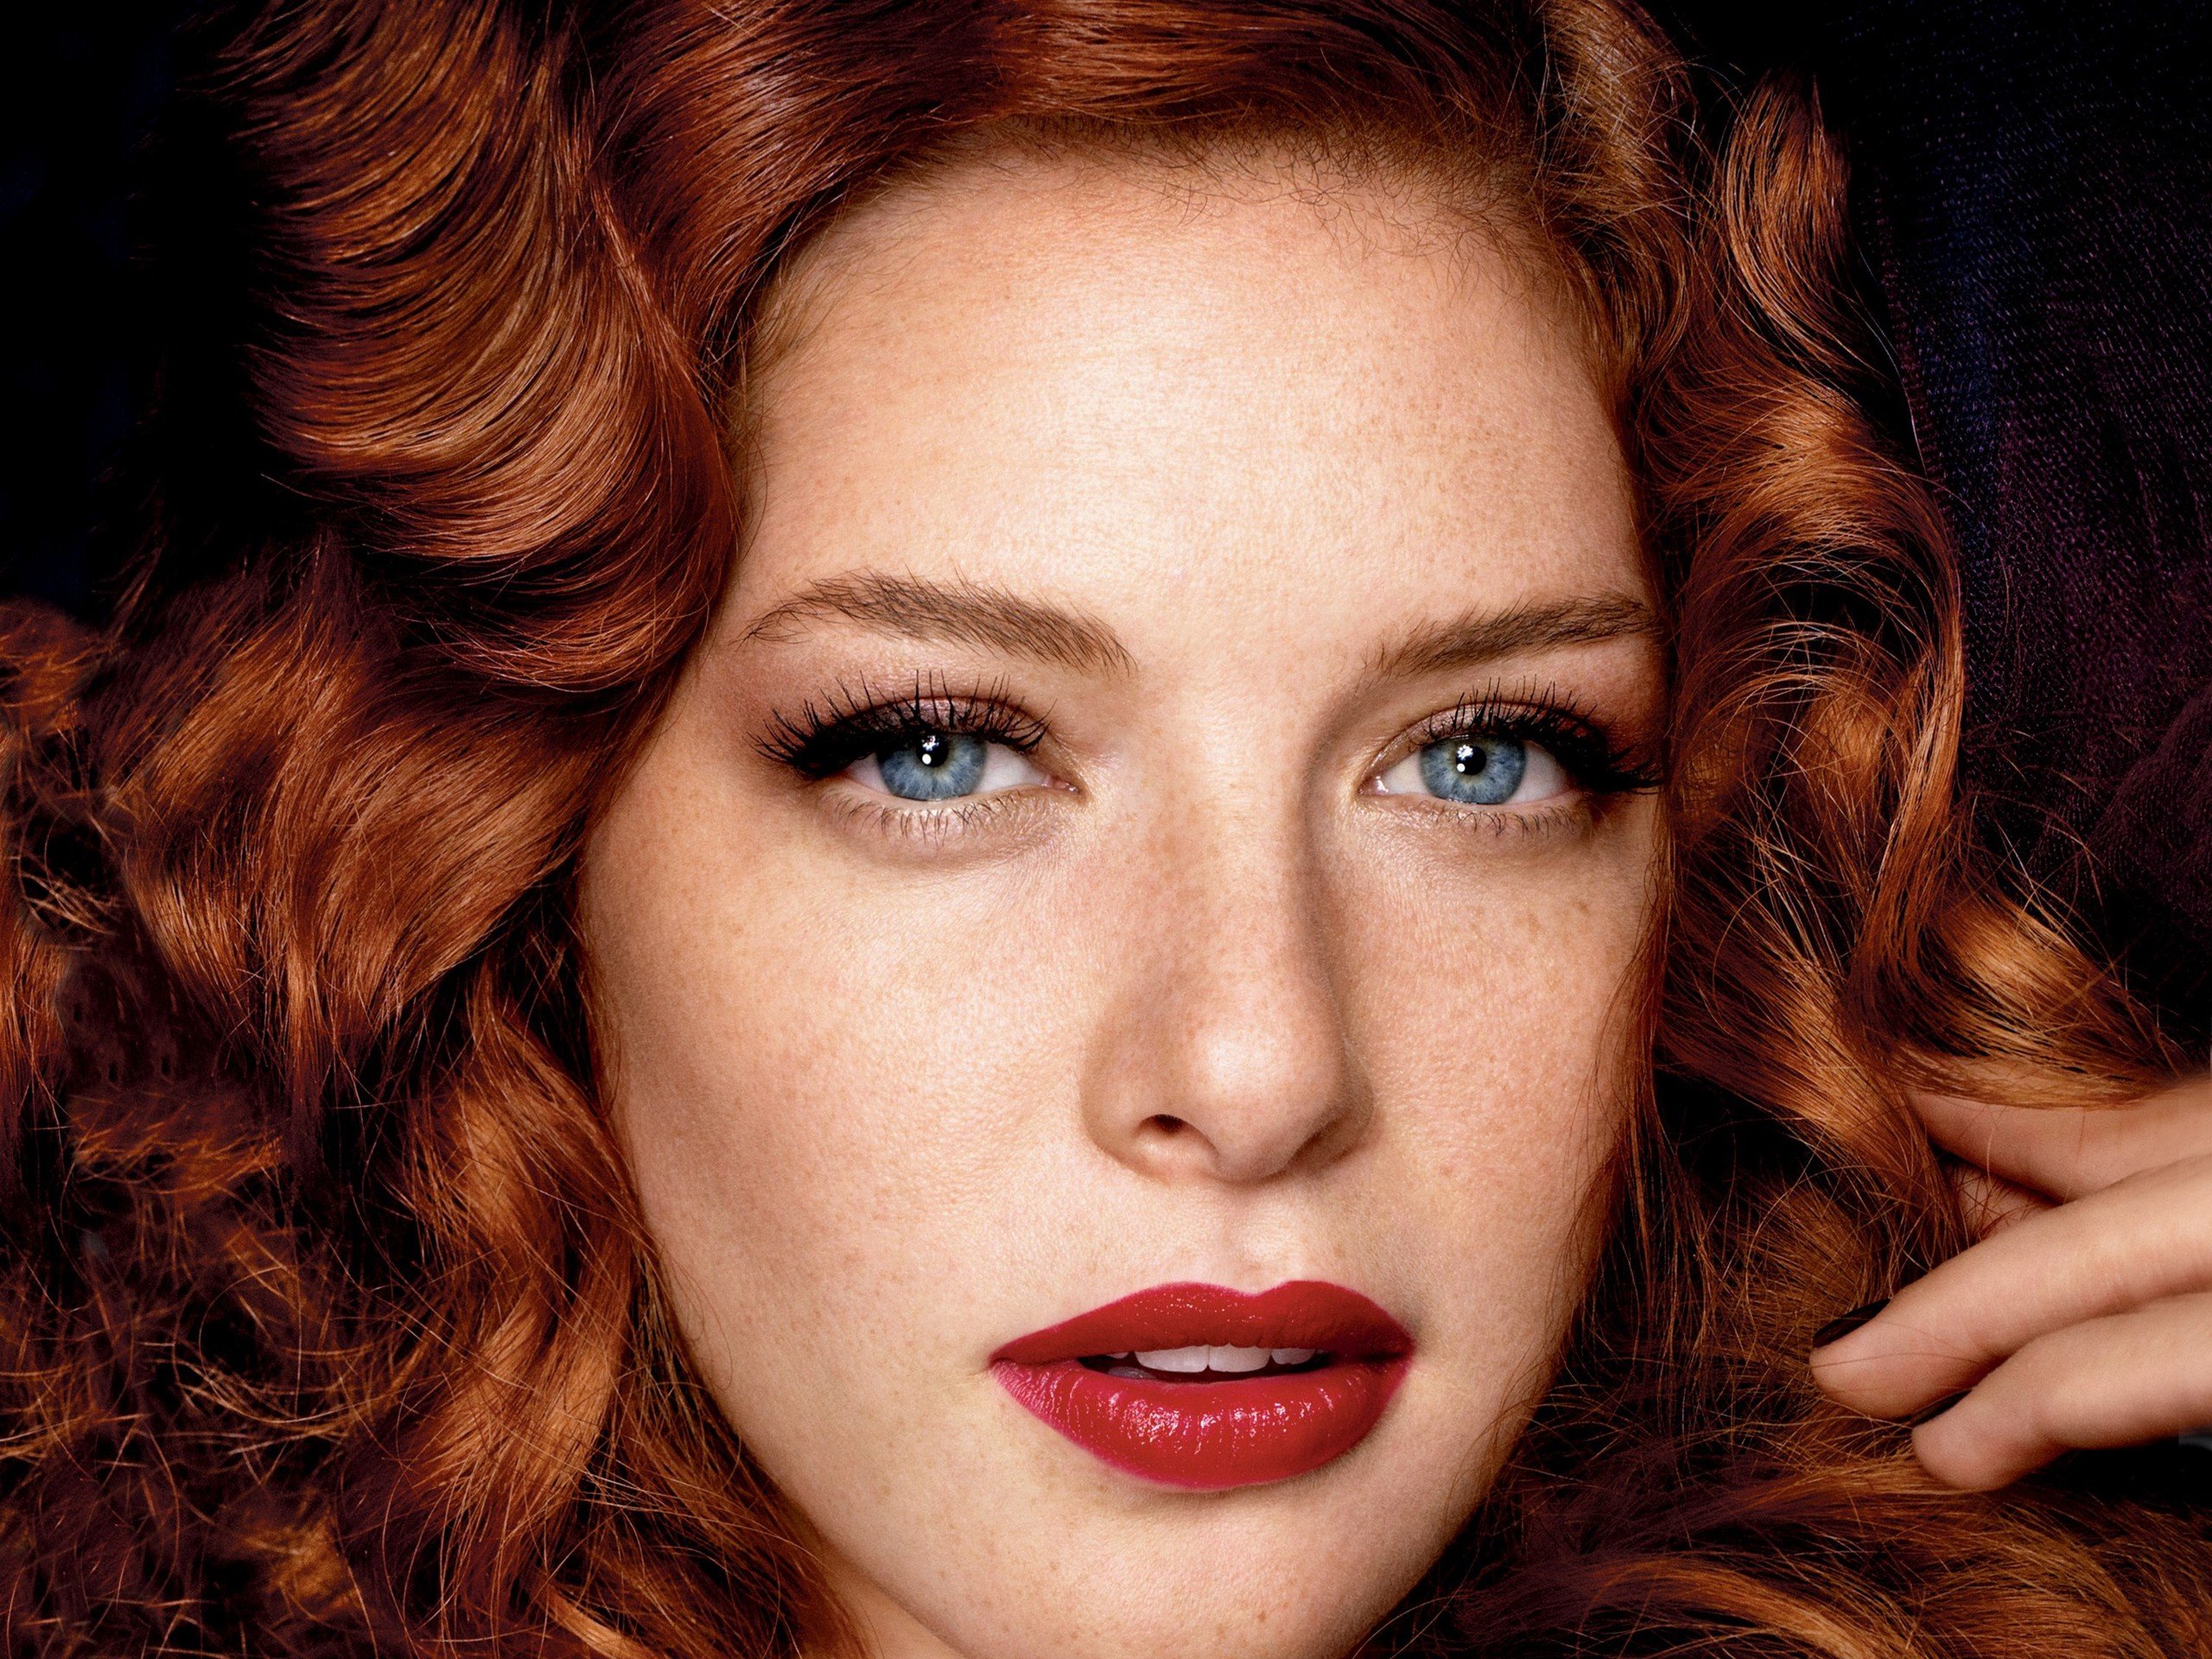 women, Model, Redhead, Long hair, Face, Portrait, Blue eyes, Looking at viewer, Open mouth, Rachelle Lefevre, Actress, Wavy hair, Freckles, Red lipstick Wallpaper